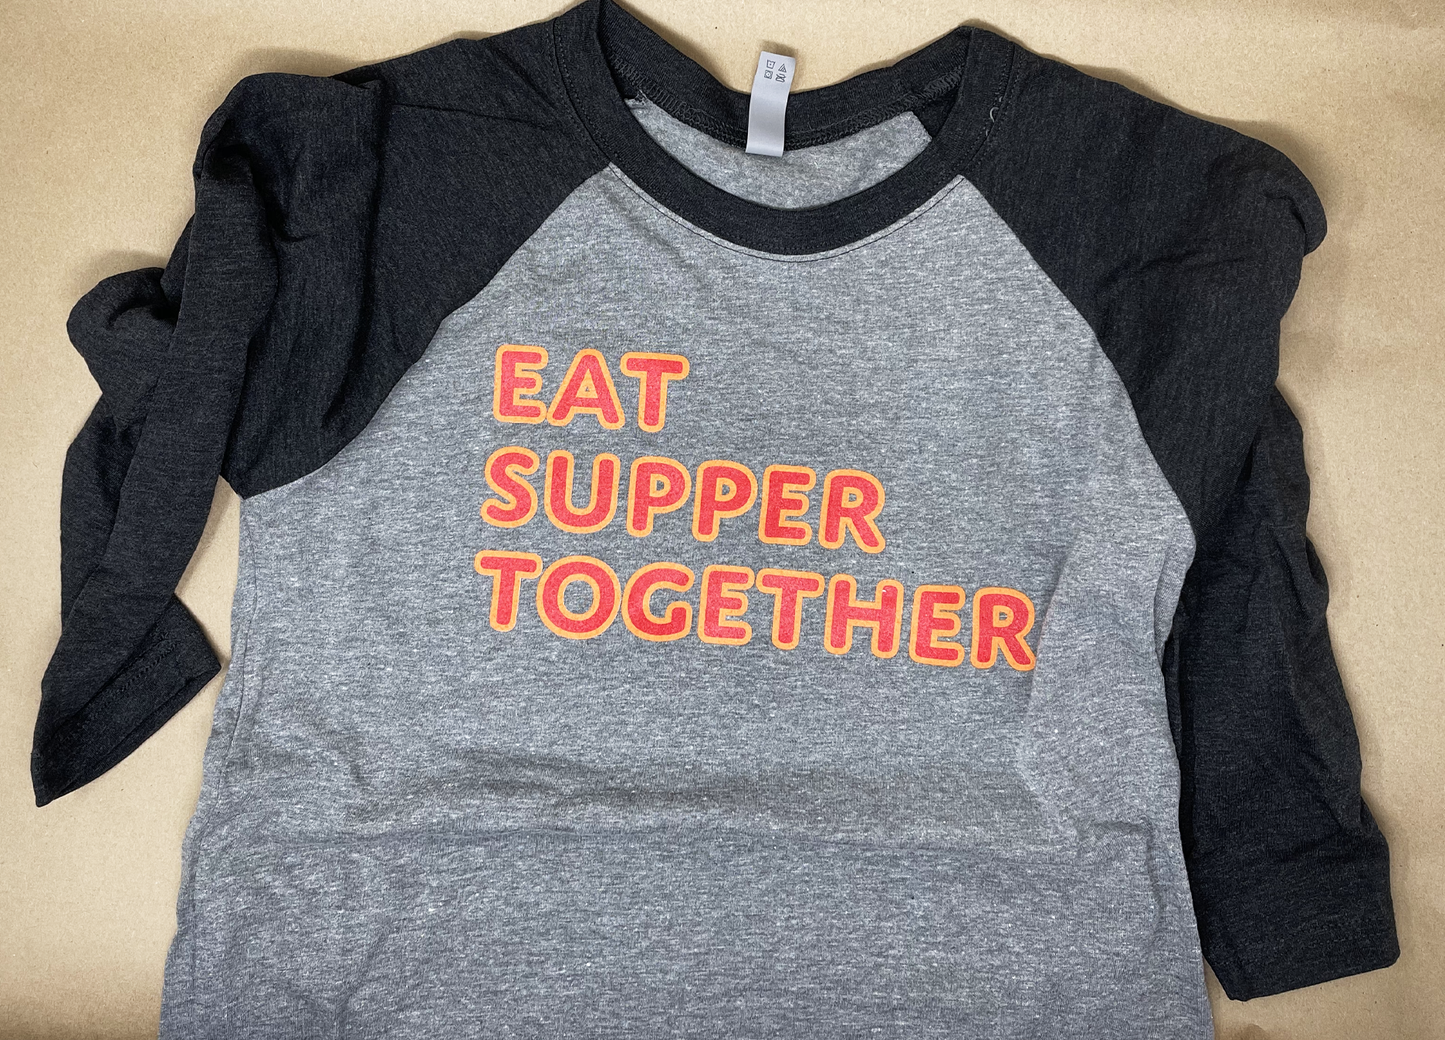 Soft, comfortable gray and black baseball jersey style T shirt with 3/4 length sleeves. Text on front reads "EAT SUPPER TOGETHER"